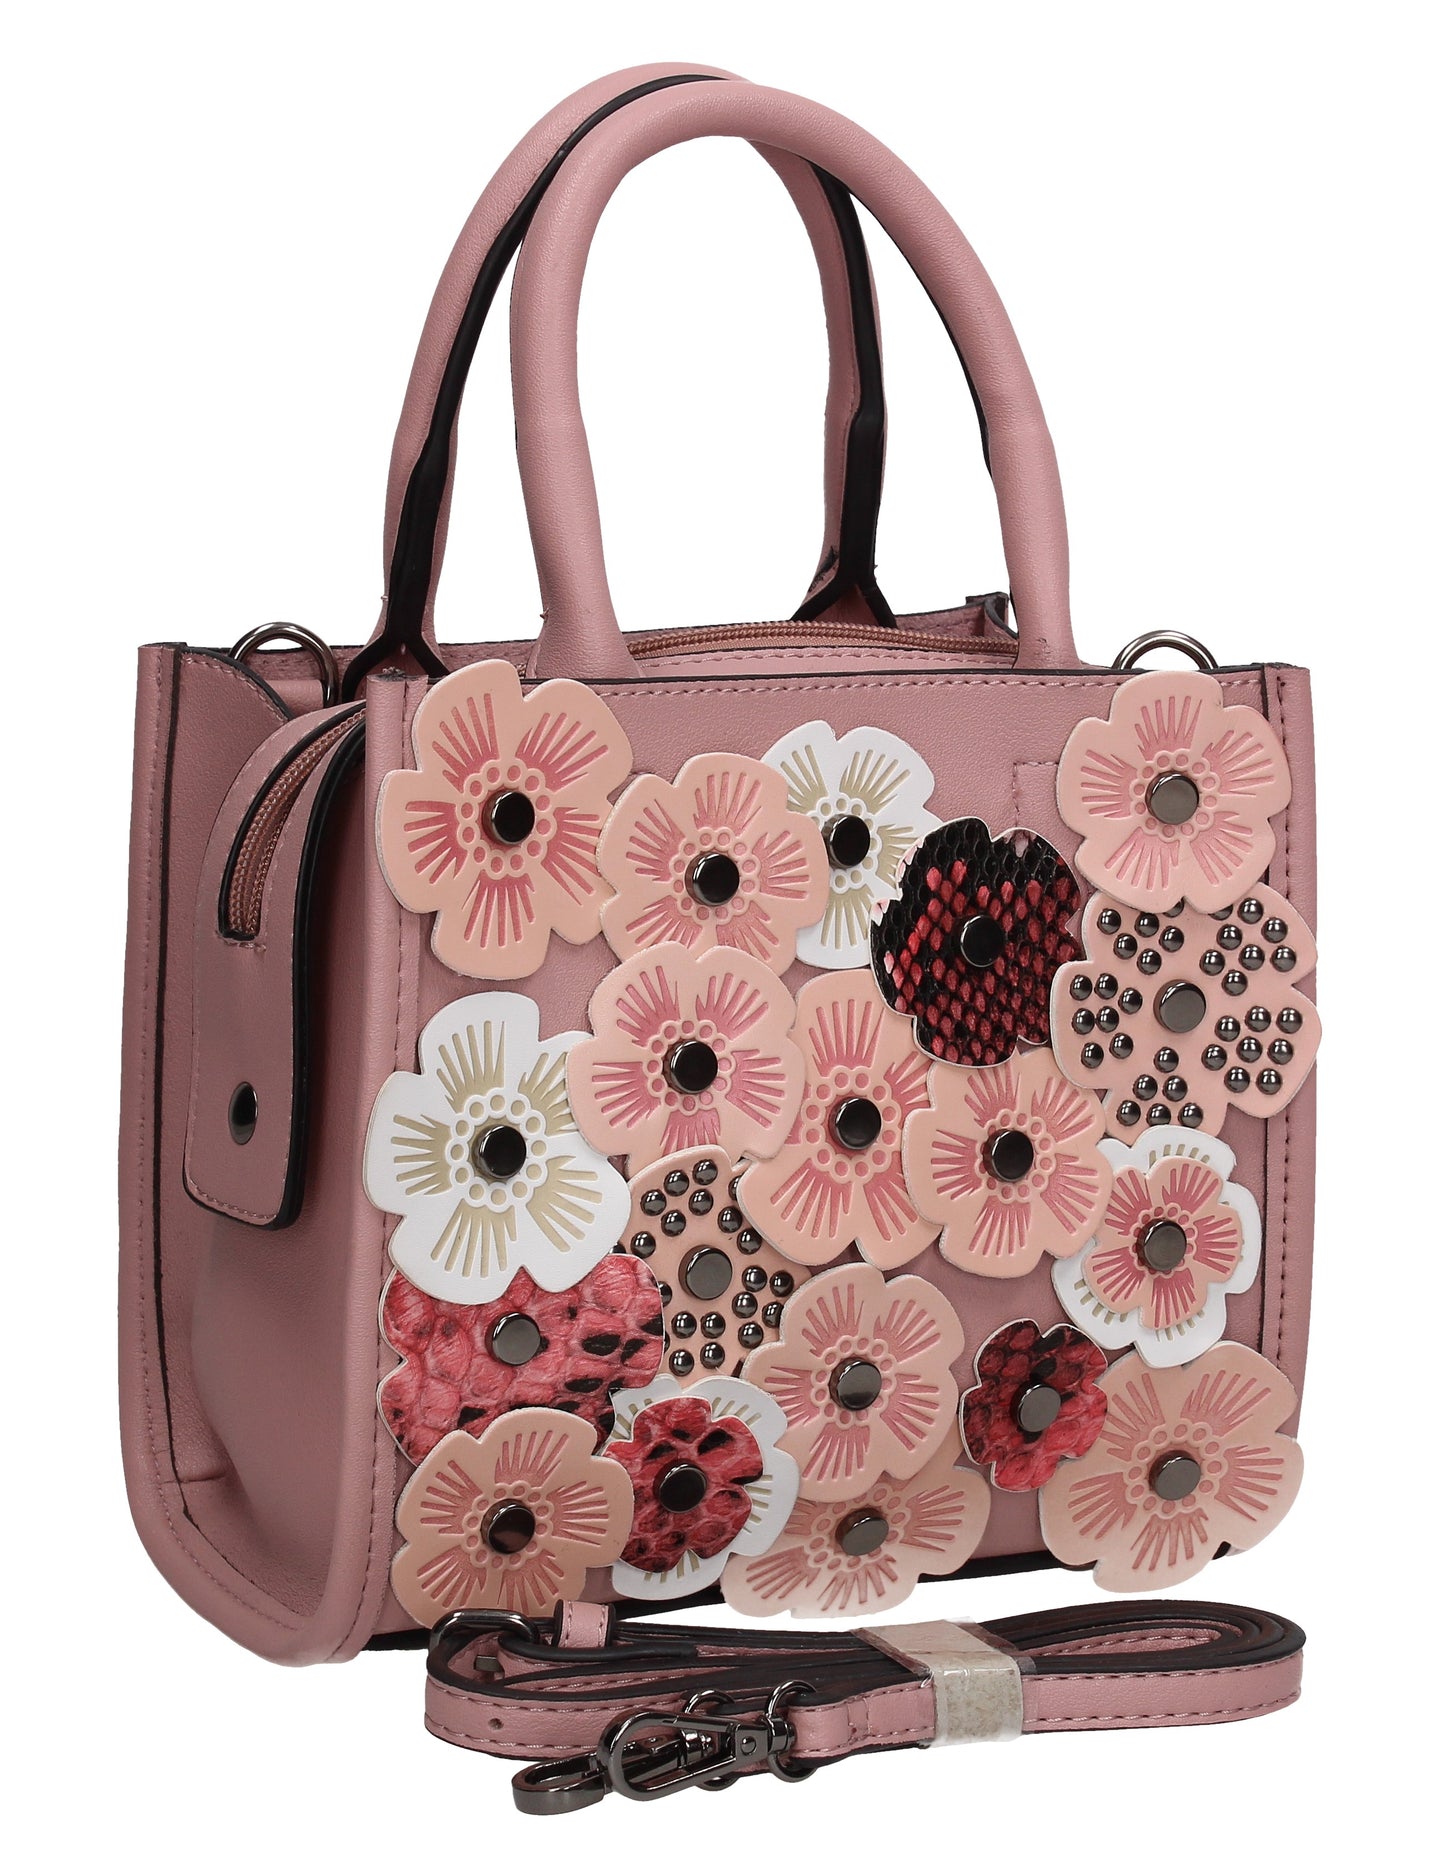 Buy your Sage Handbag Pink Today! Buy with confidence from Swankyswans